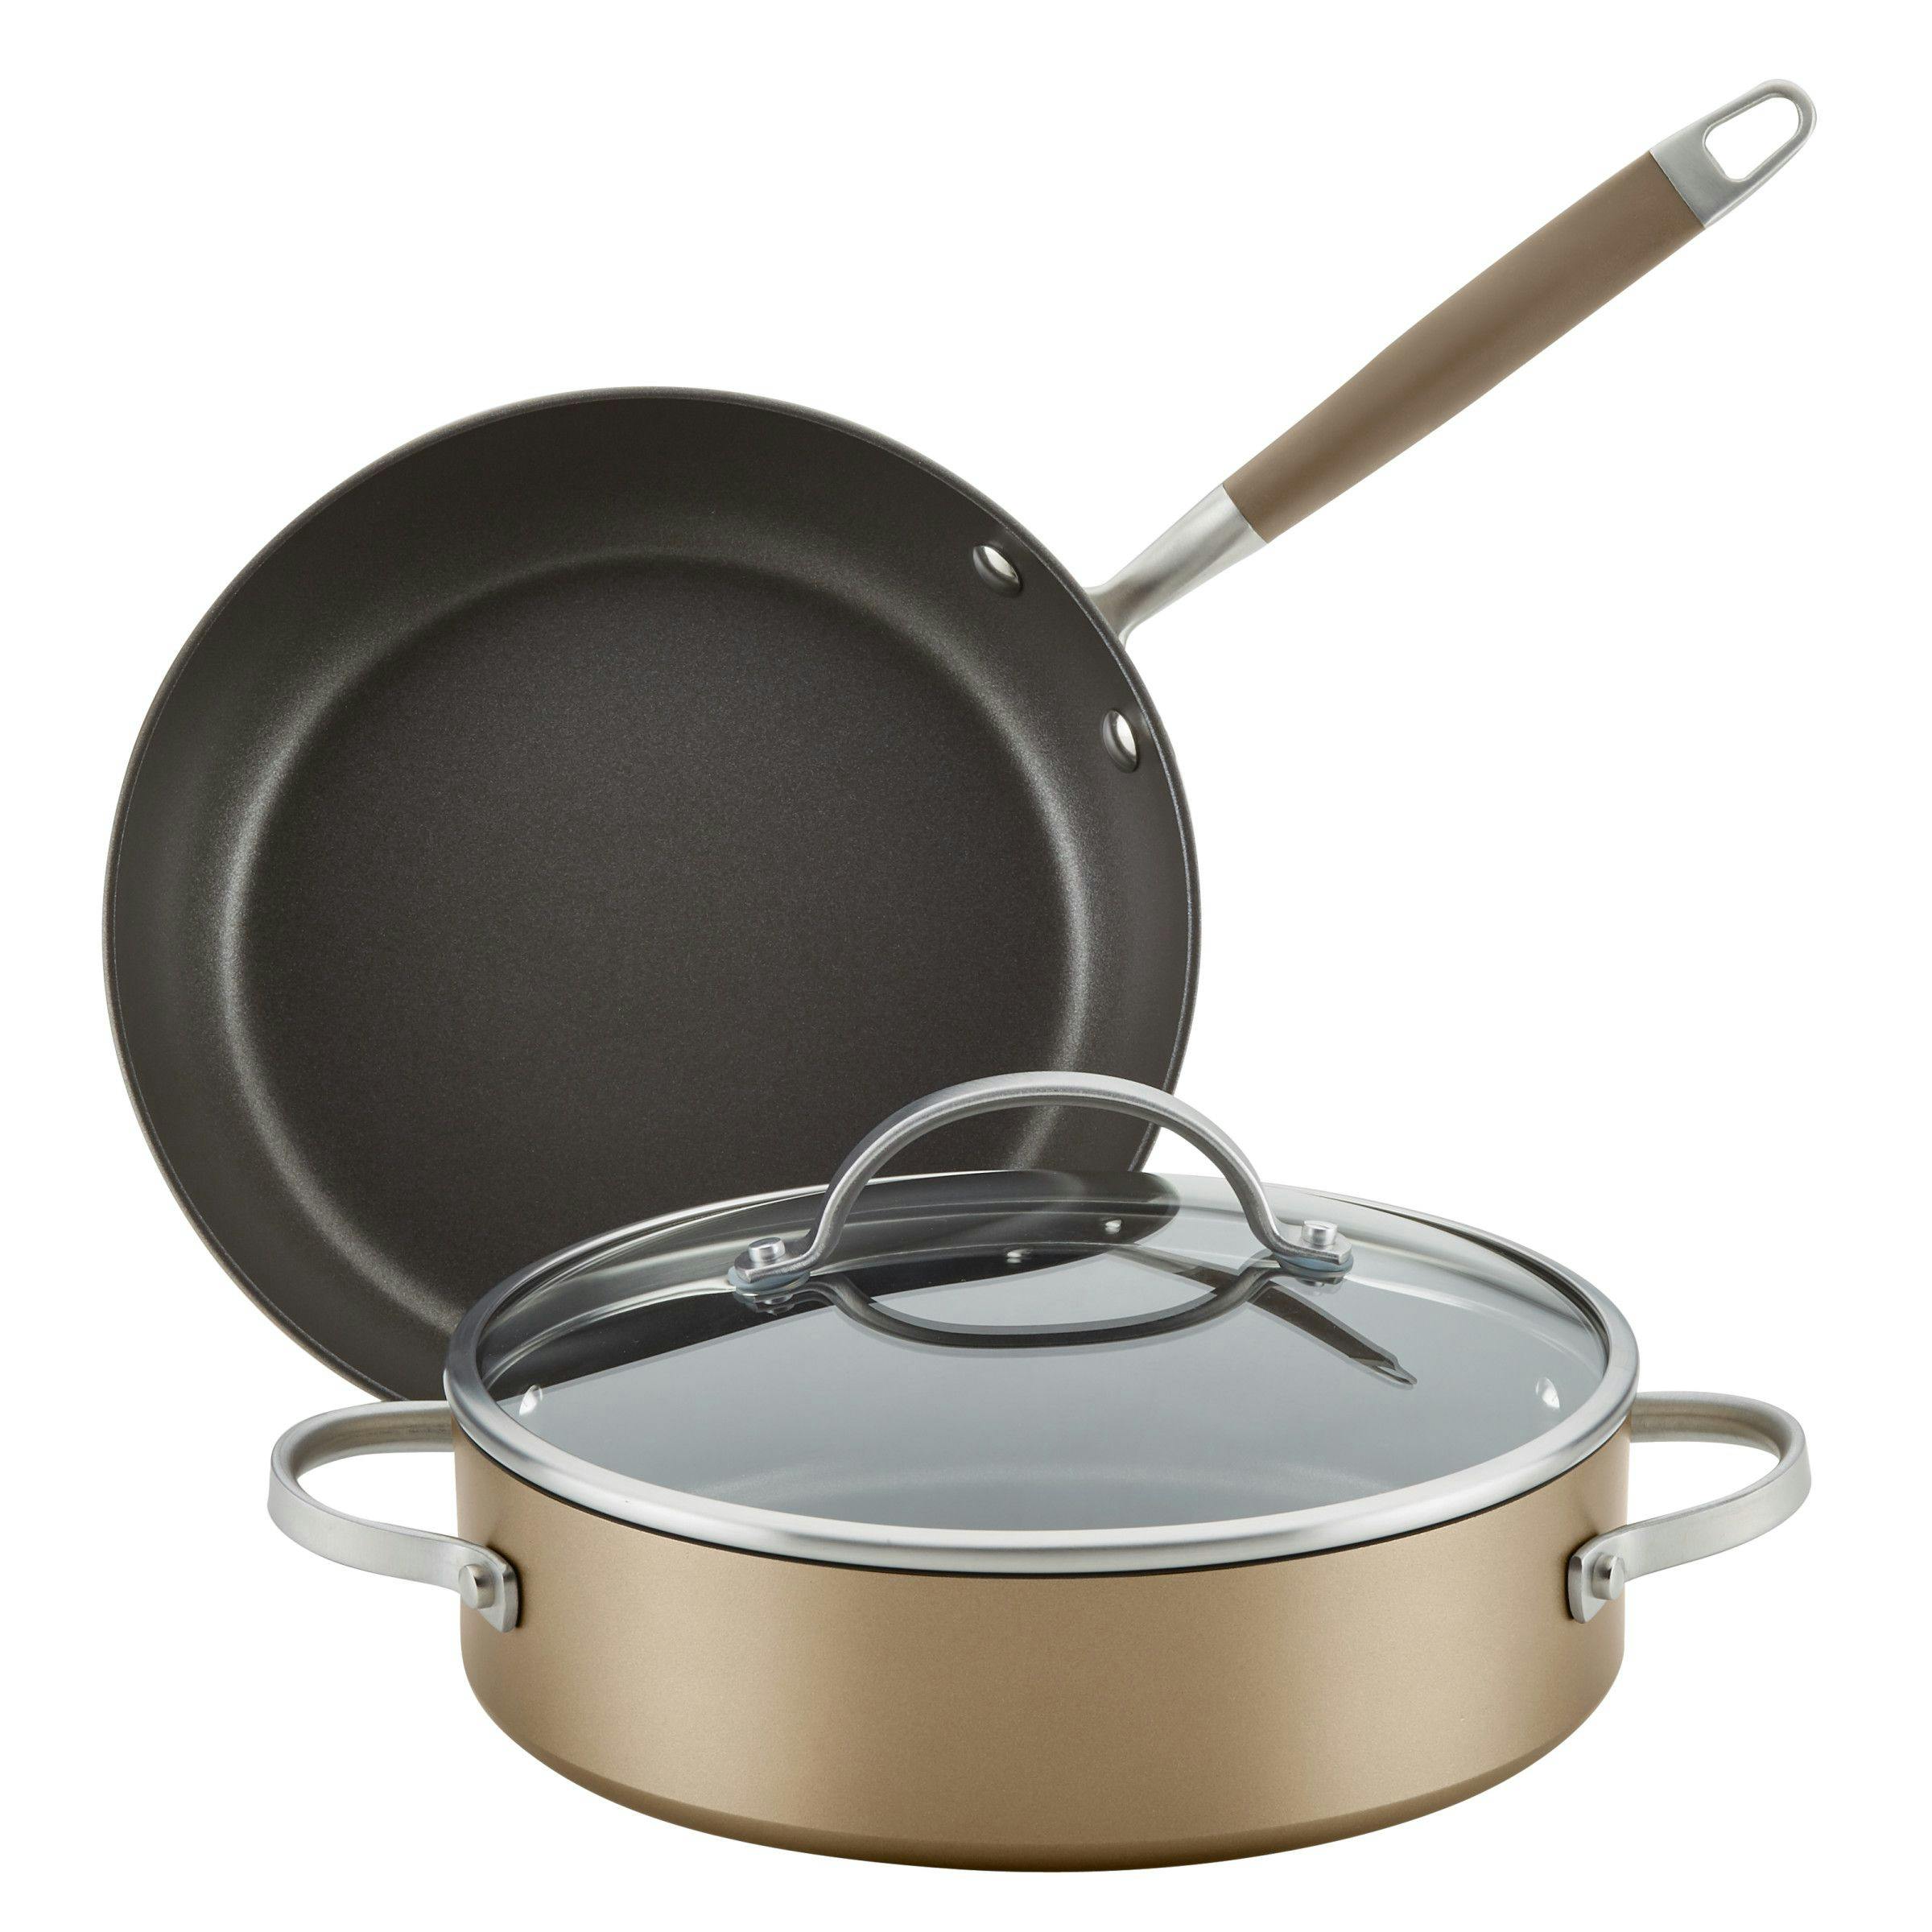 Anolon Advanced Home Hard-Anodized Nonstick Frying Pan and Sauteuse Cookware Set, 3-Piece